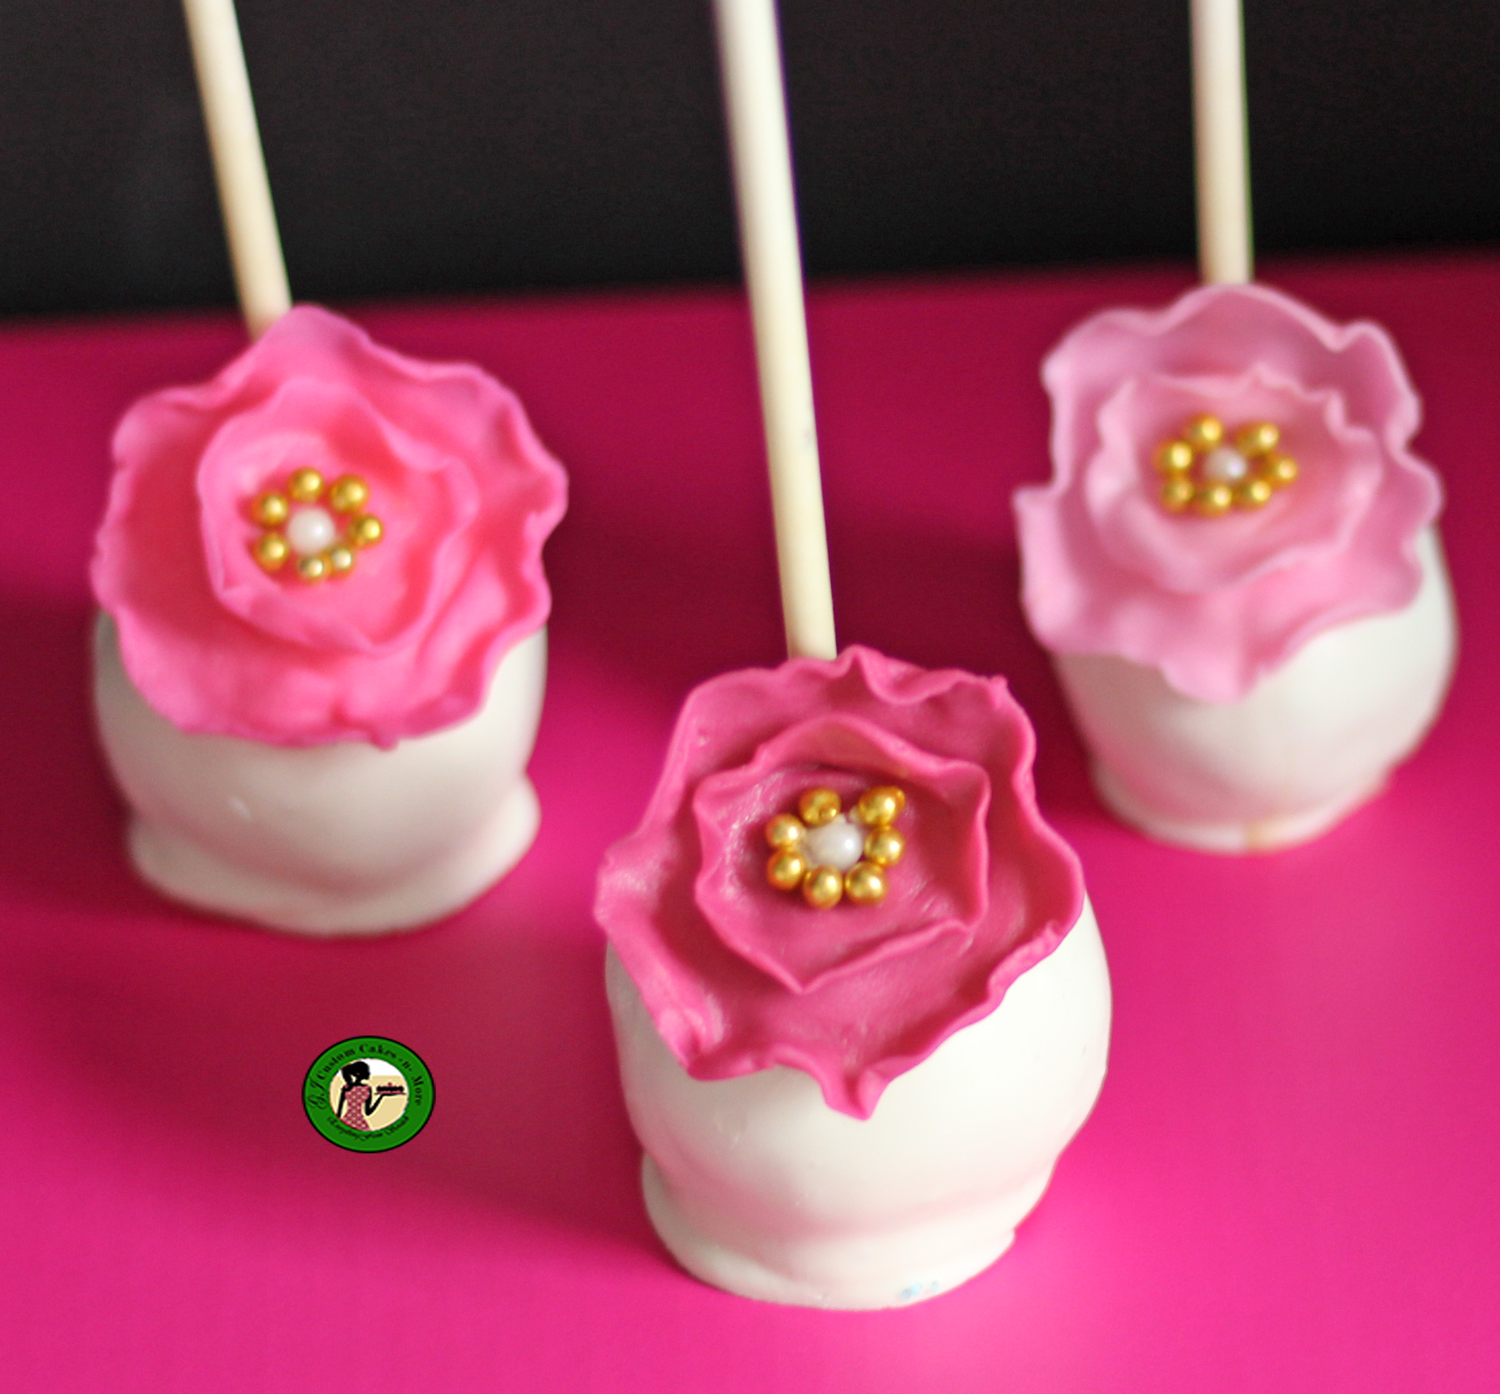 https://www.wowisthatreallyedible.com/wp-content/uploads/2018/02/flowers-cake-pops.png